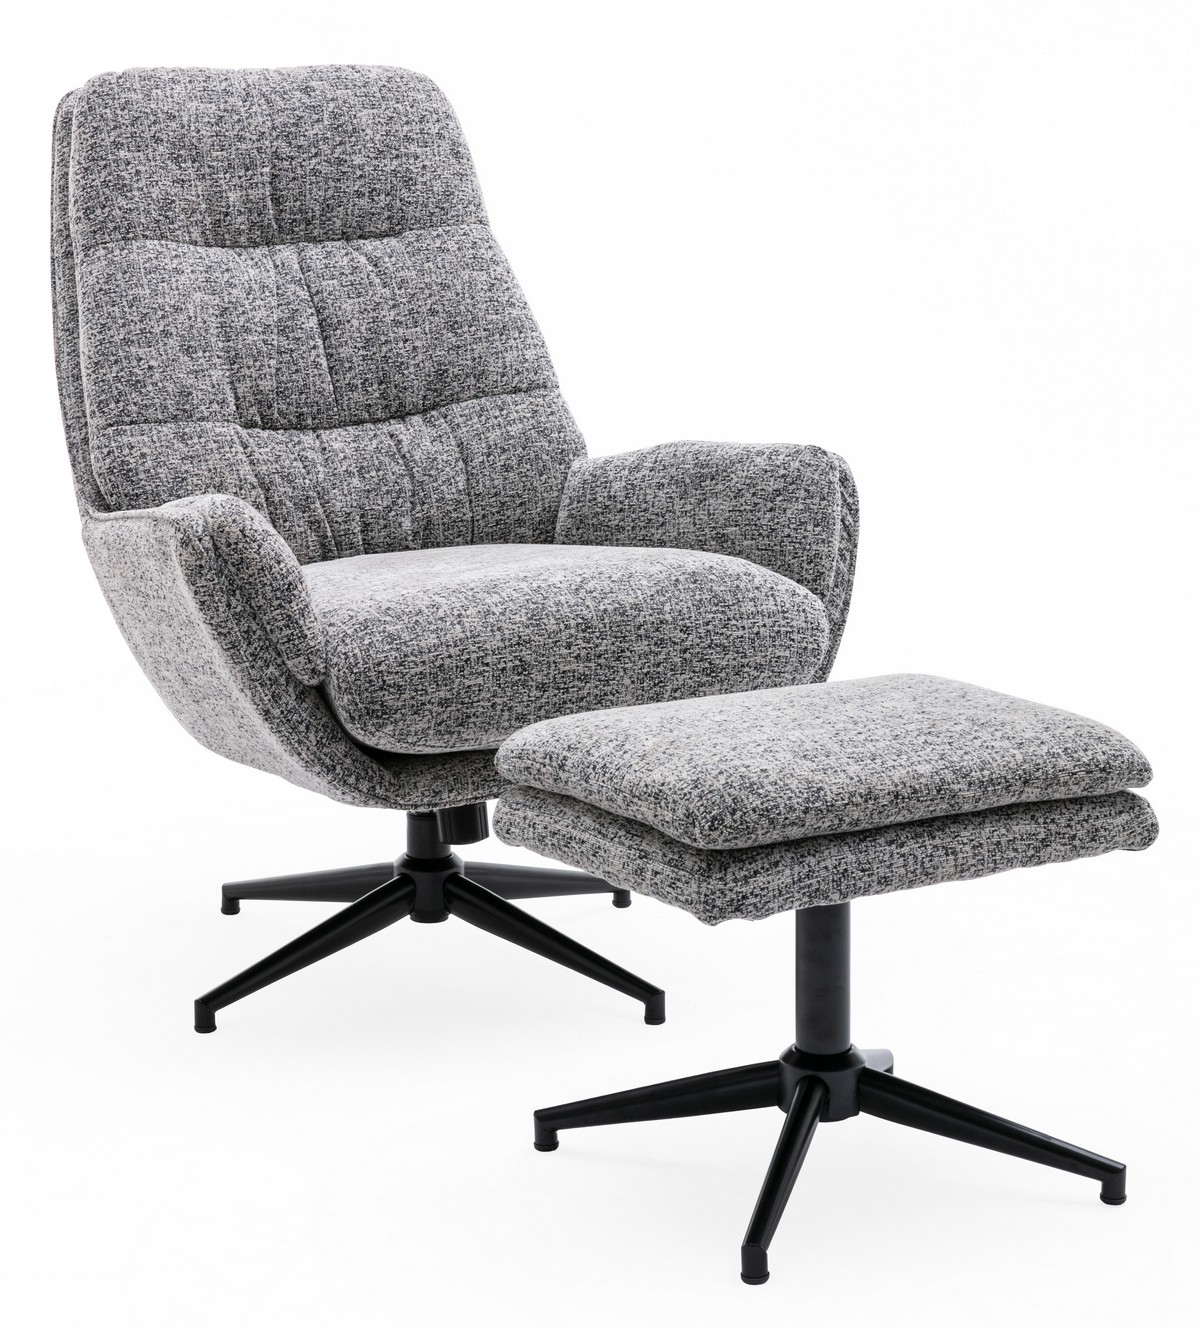 Padstow TV CHAIR BOUCLE CUTOUT (2)